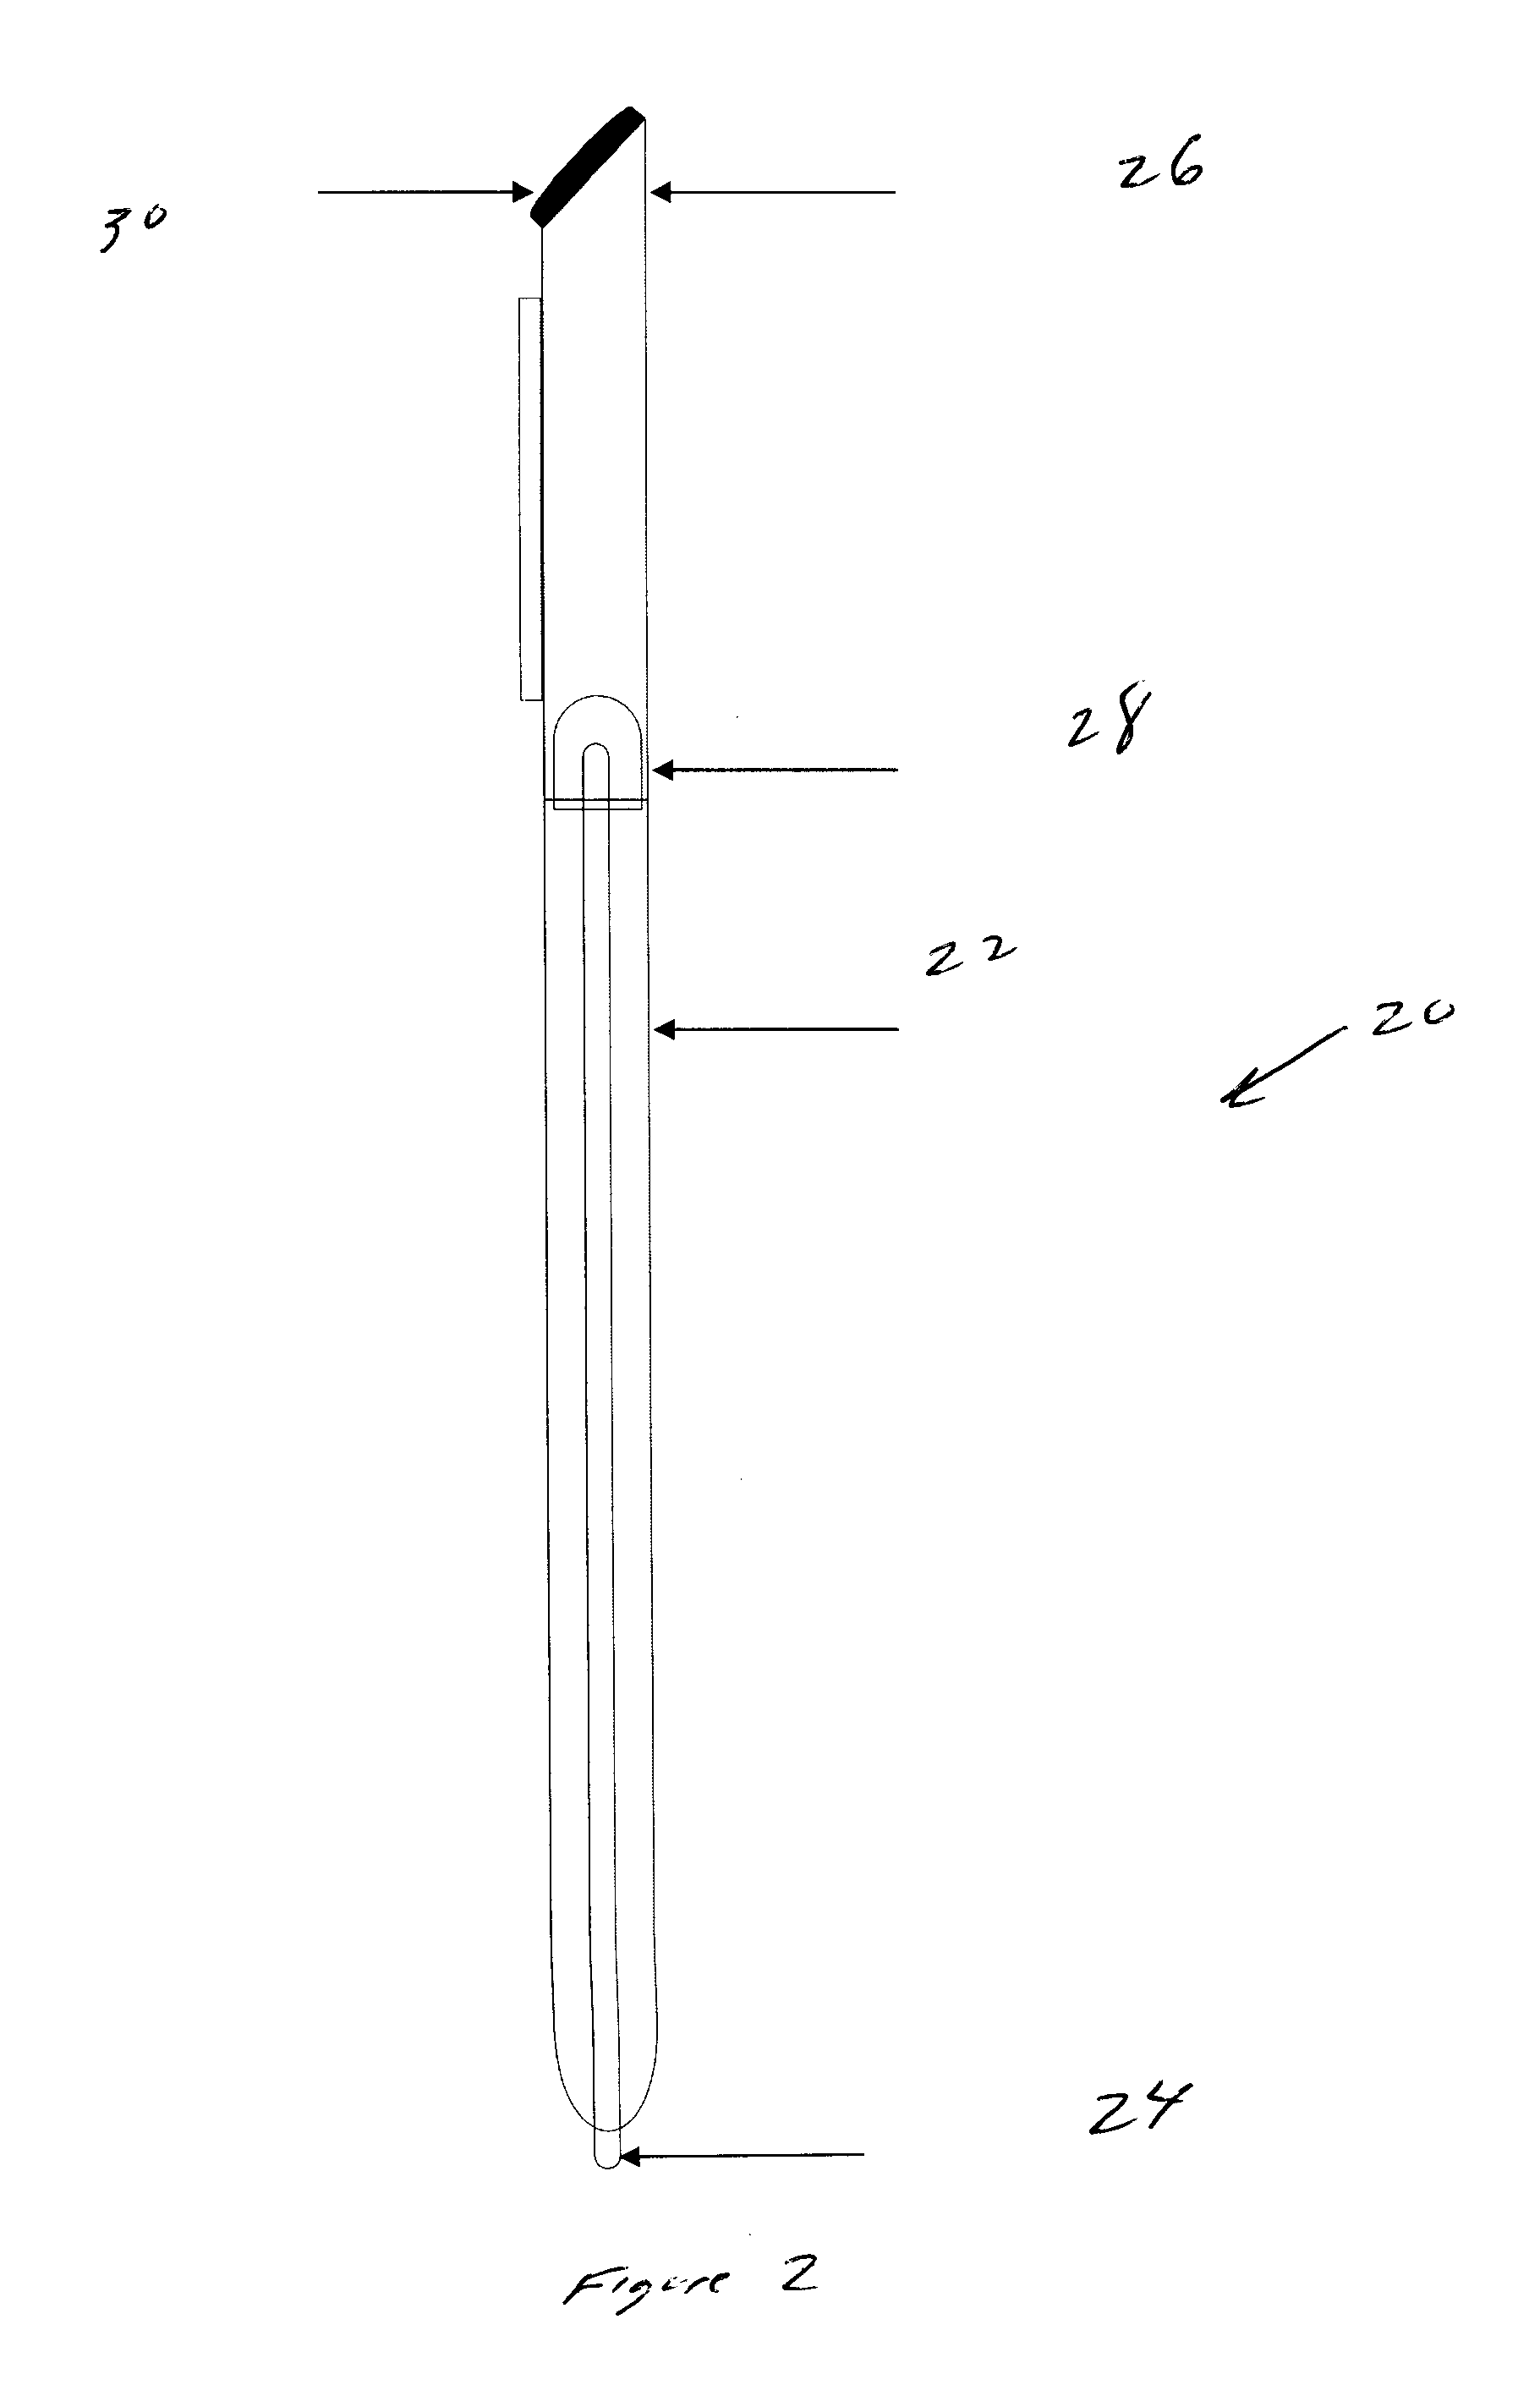 Multifunctional writing apparatus with capacitive touch screen stylus